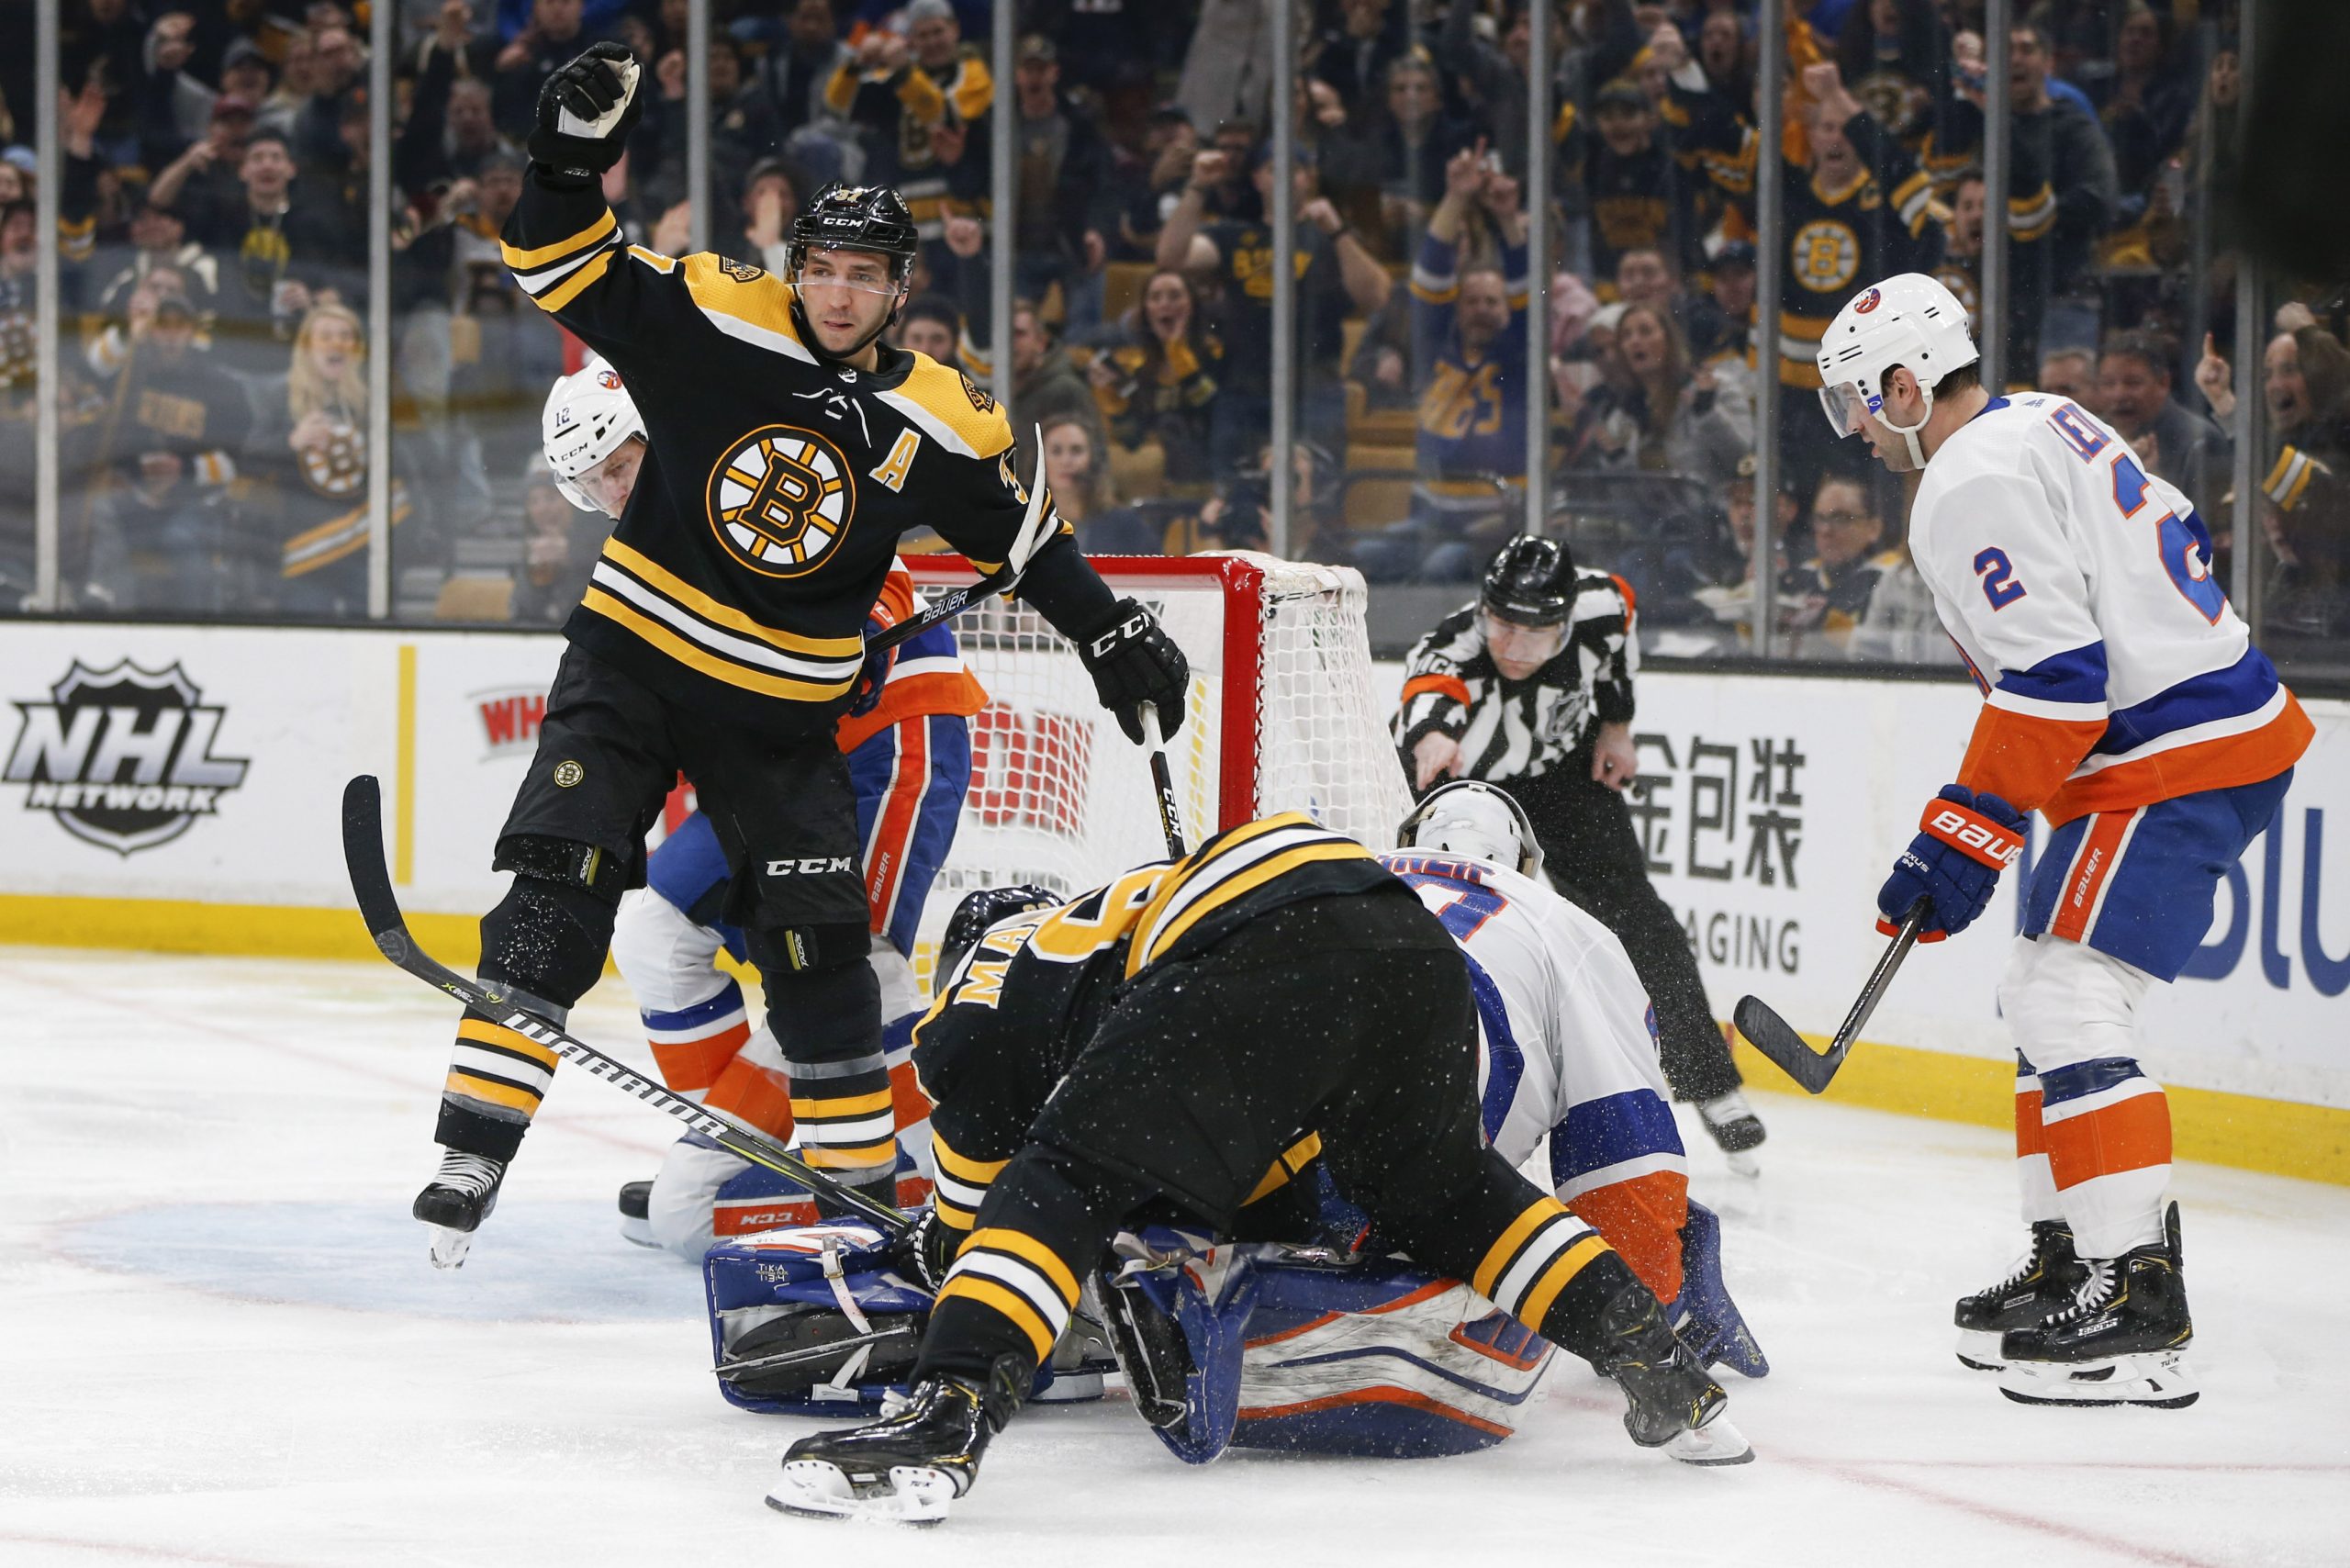 Feb 5, 2019; Boston, MA, USA; Boston Bruins center Patrice Bergeron (37) reacts after scoring a goal on New York Islanders goaltender Robin Lehner (40) during the second period at TD Garden. Mandatory Credit: Greg M. Cooper-USA TODAY Sports